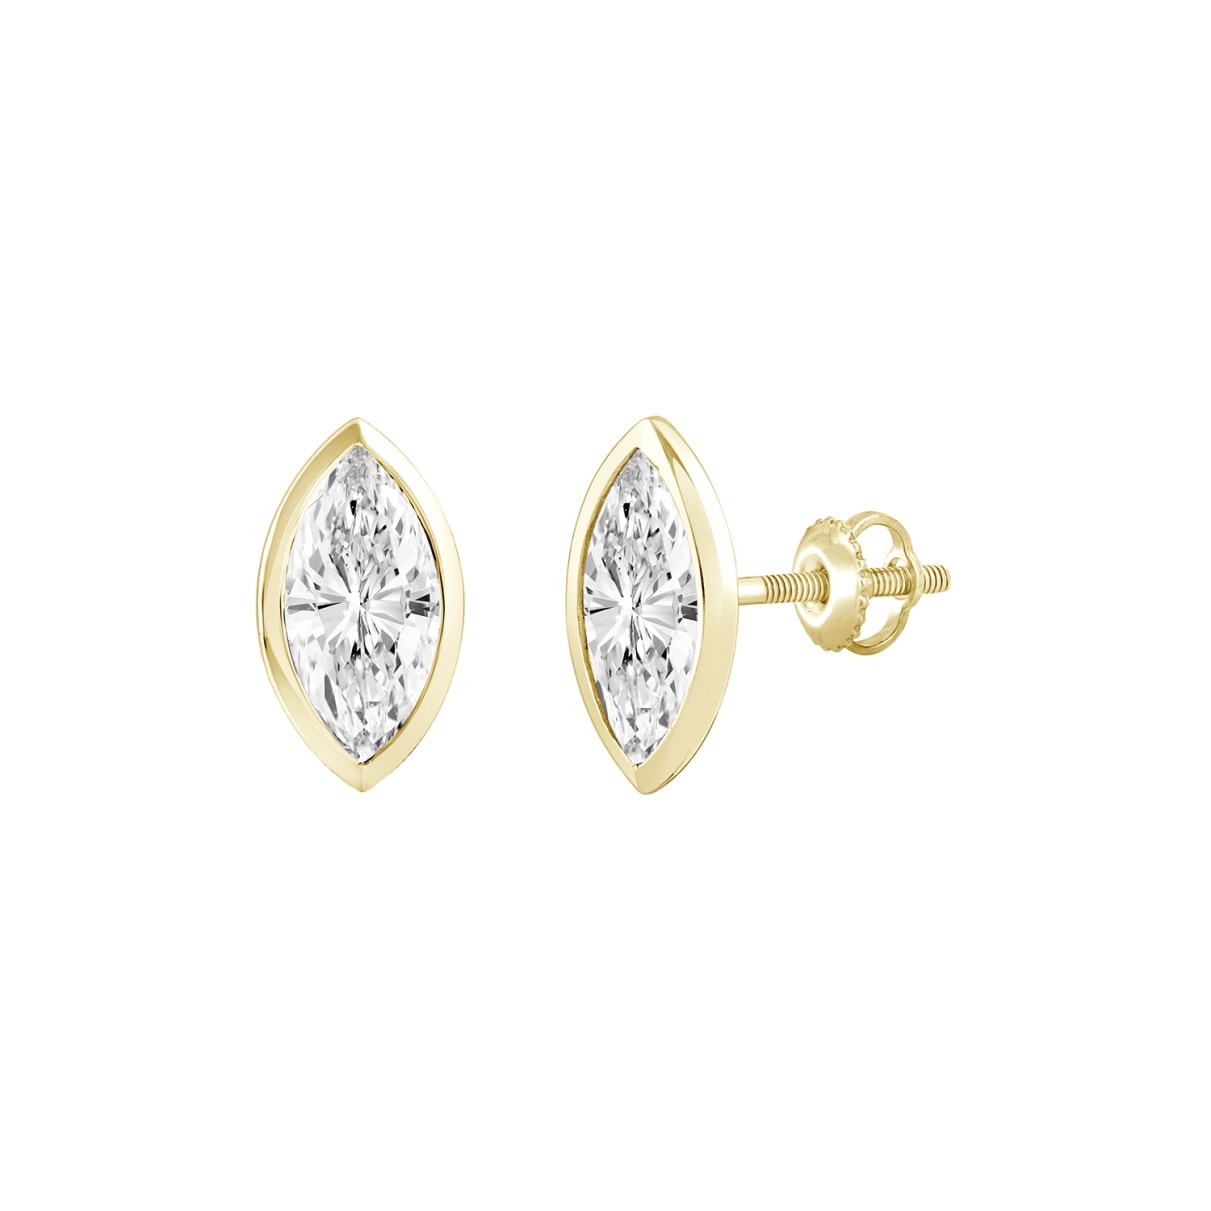 LADIES SOLITAIRE EARRINGS 1CT MARQUISE DIAMOND 14K YELLOW GOLD